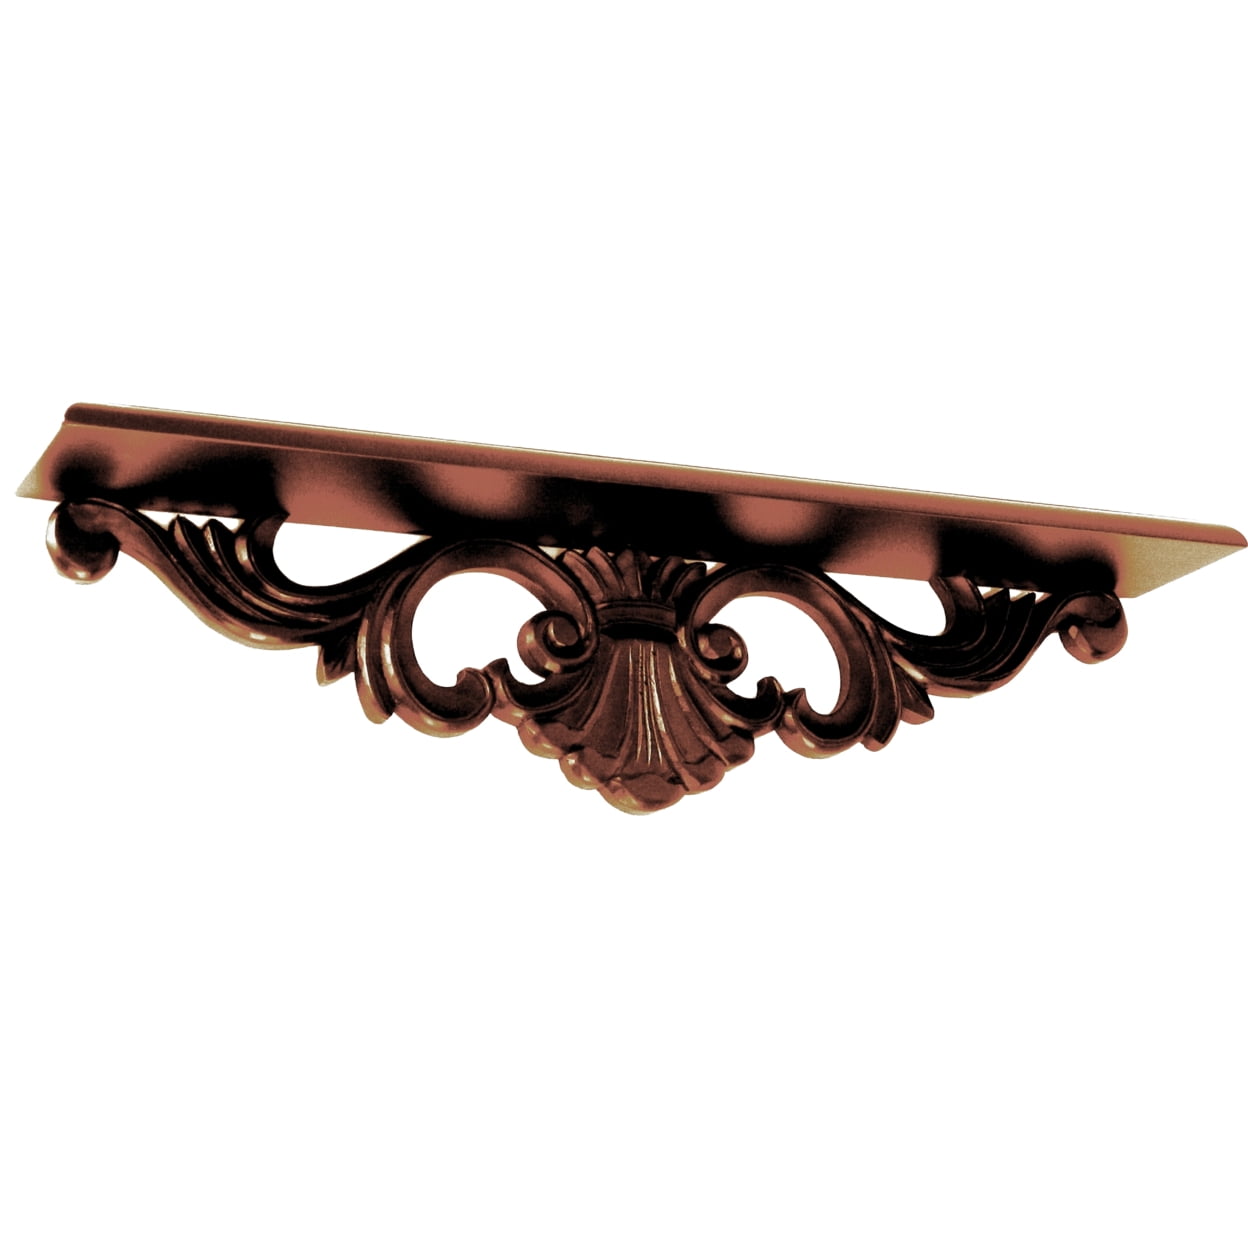 Bm210442 Hand Carved Wooden Wall Shelf With Floral Design Display, Brown